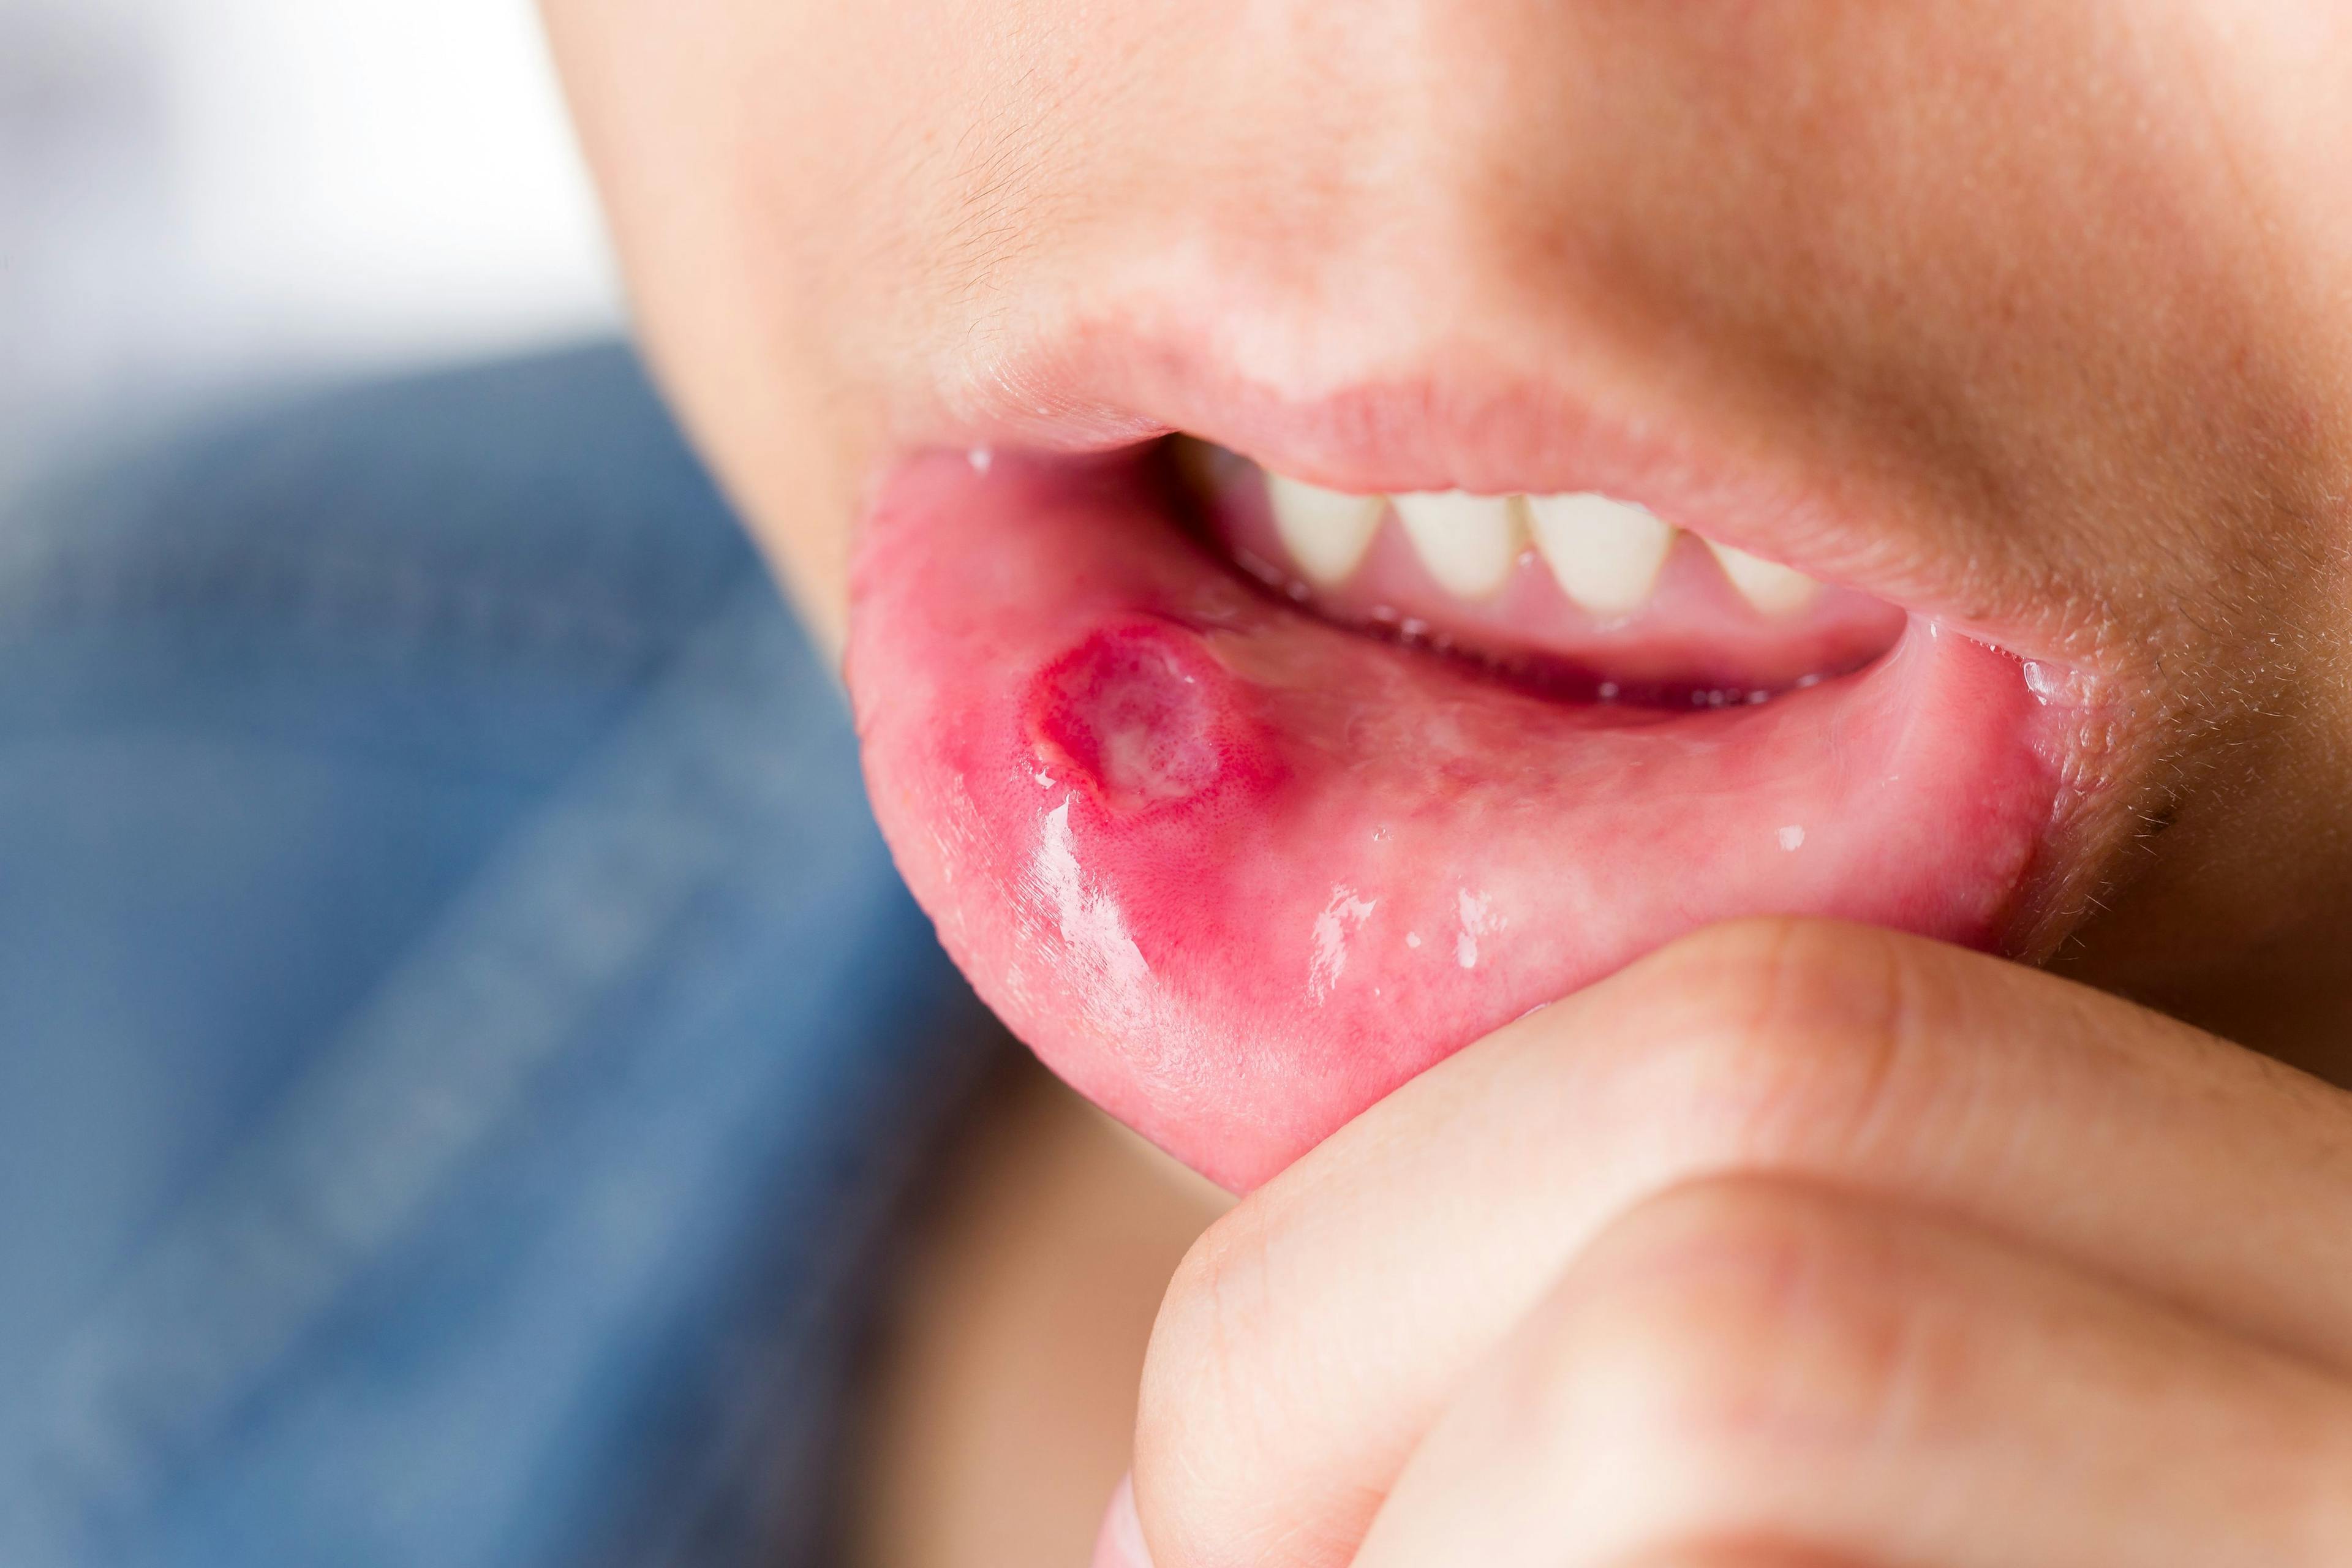 Apremilast Reduces Oral Ulcers in Behçet’s Syndrome